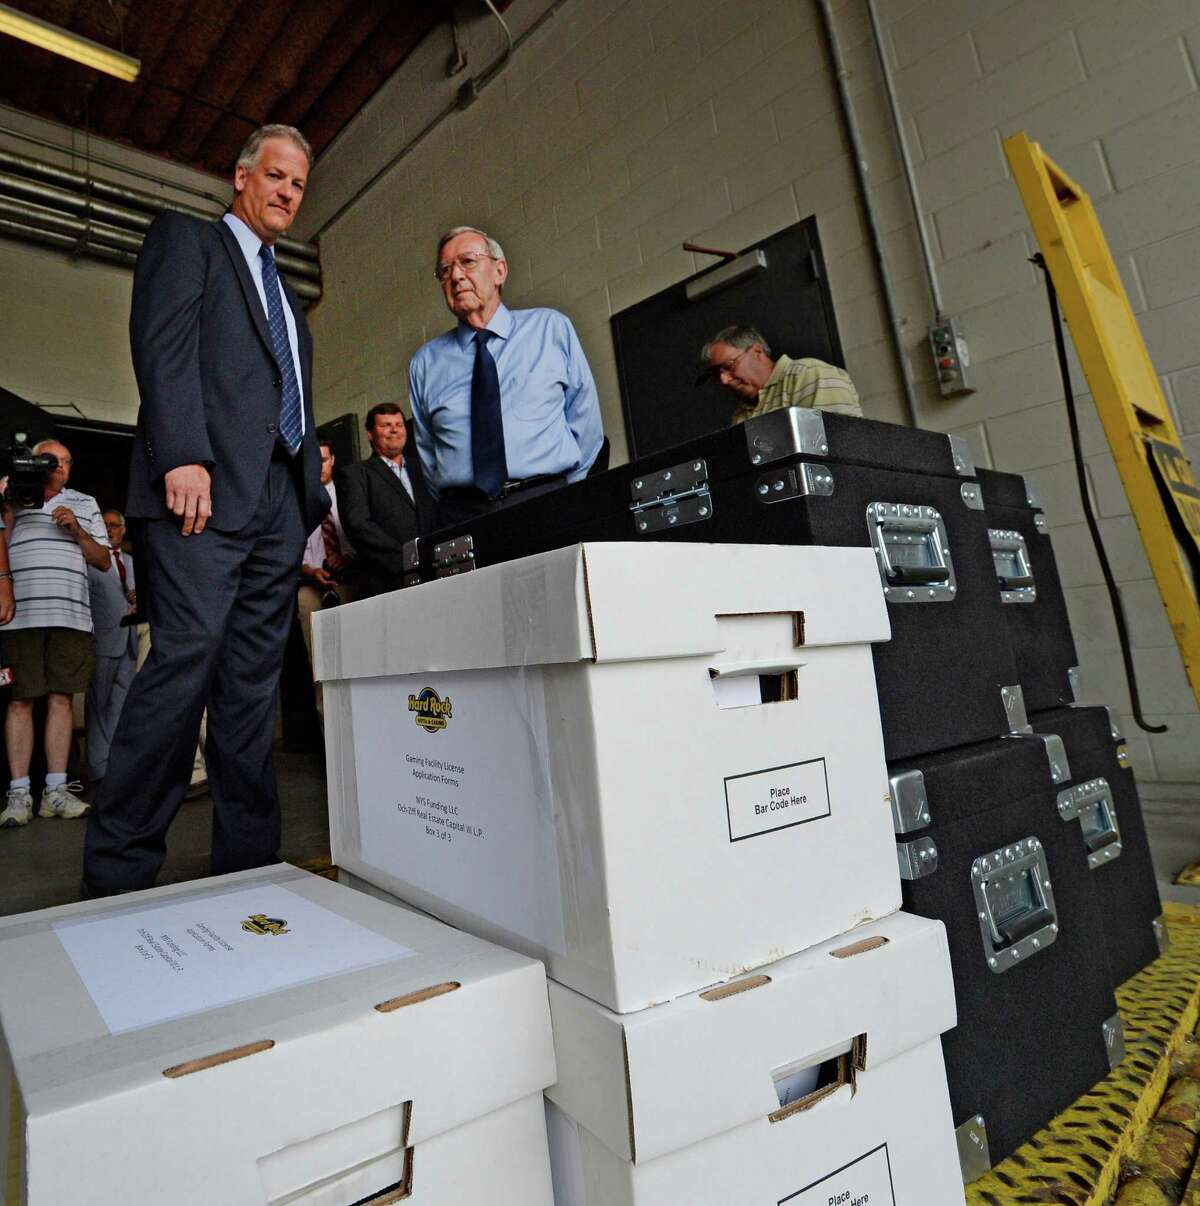 Capital OTB's John Signor, left and Rensselaer Mayor Dan Dwyer, right watch as the Rensselaer casino bid documents are delivered at the New York State Gaming building Monday morning June 30, 2014 in Schenectady, N.Y. The deadline for bids to hold a license for one of seven full service casinos in New York State ended Monday at 4 p.m. (Skip Dickstein / Times Union)